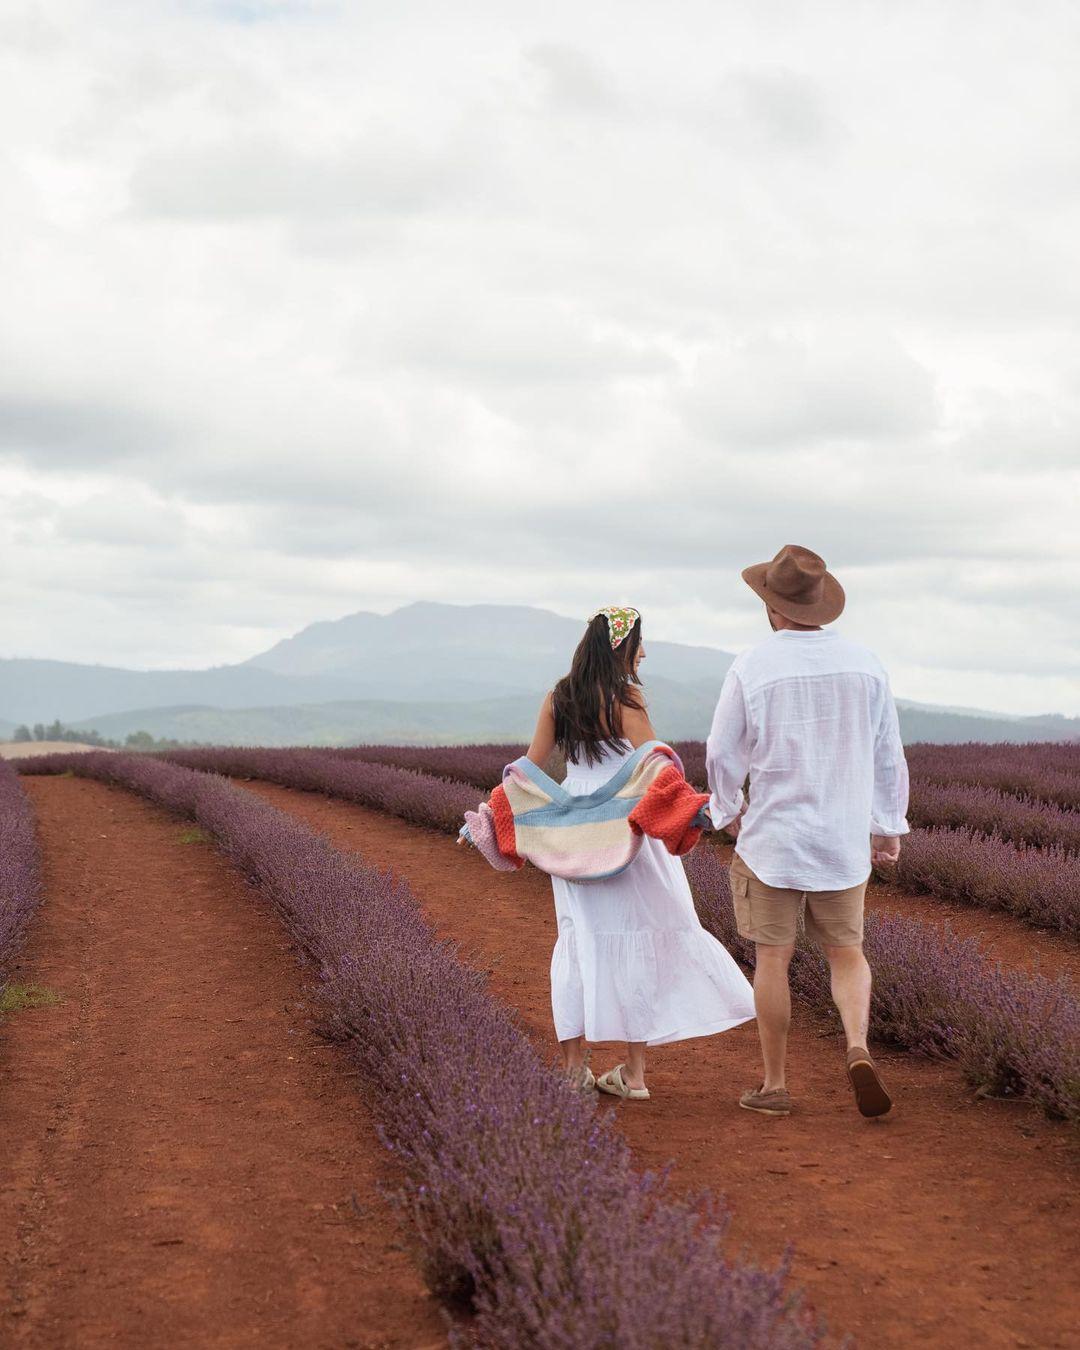 class="content__text"
 Managed to experience some of Tasmania’s magical lavender fields before the end of the season. The sight and smell of rolling fields of lavender was amazing and the ice cream was delishhh 🍦another epic adventure with @jetstarnz Ad 
-
-
-
 #tasmania #tazzy #lavender 
 